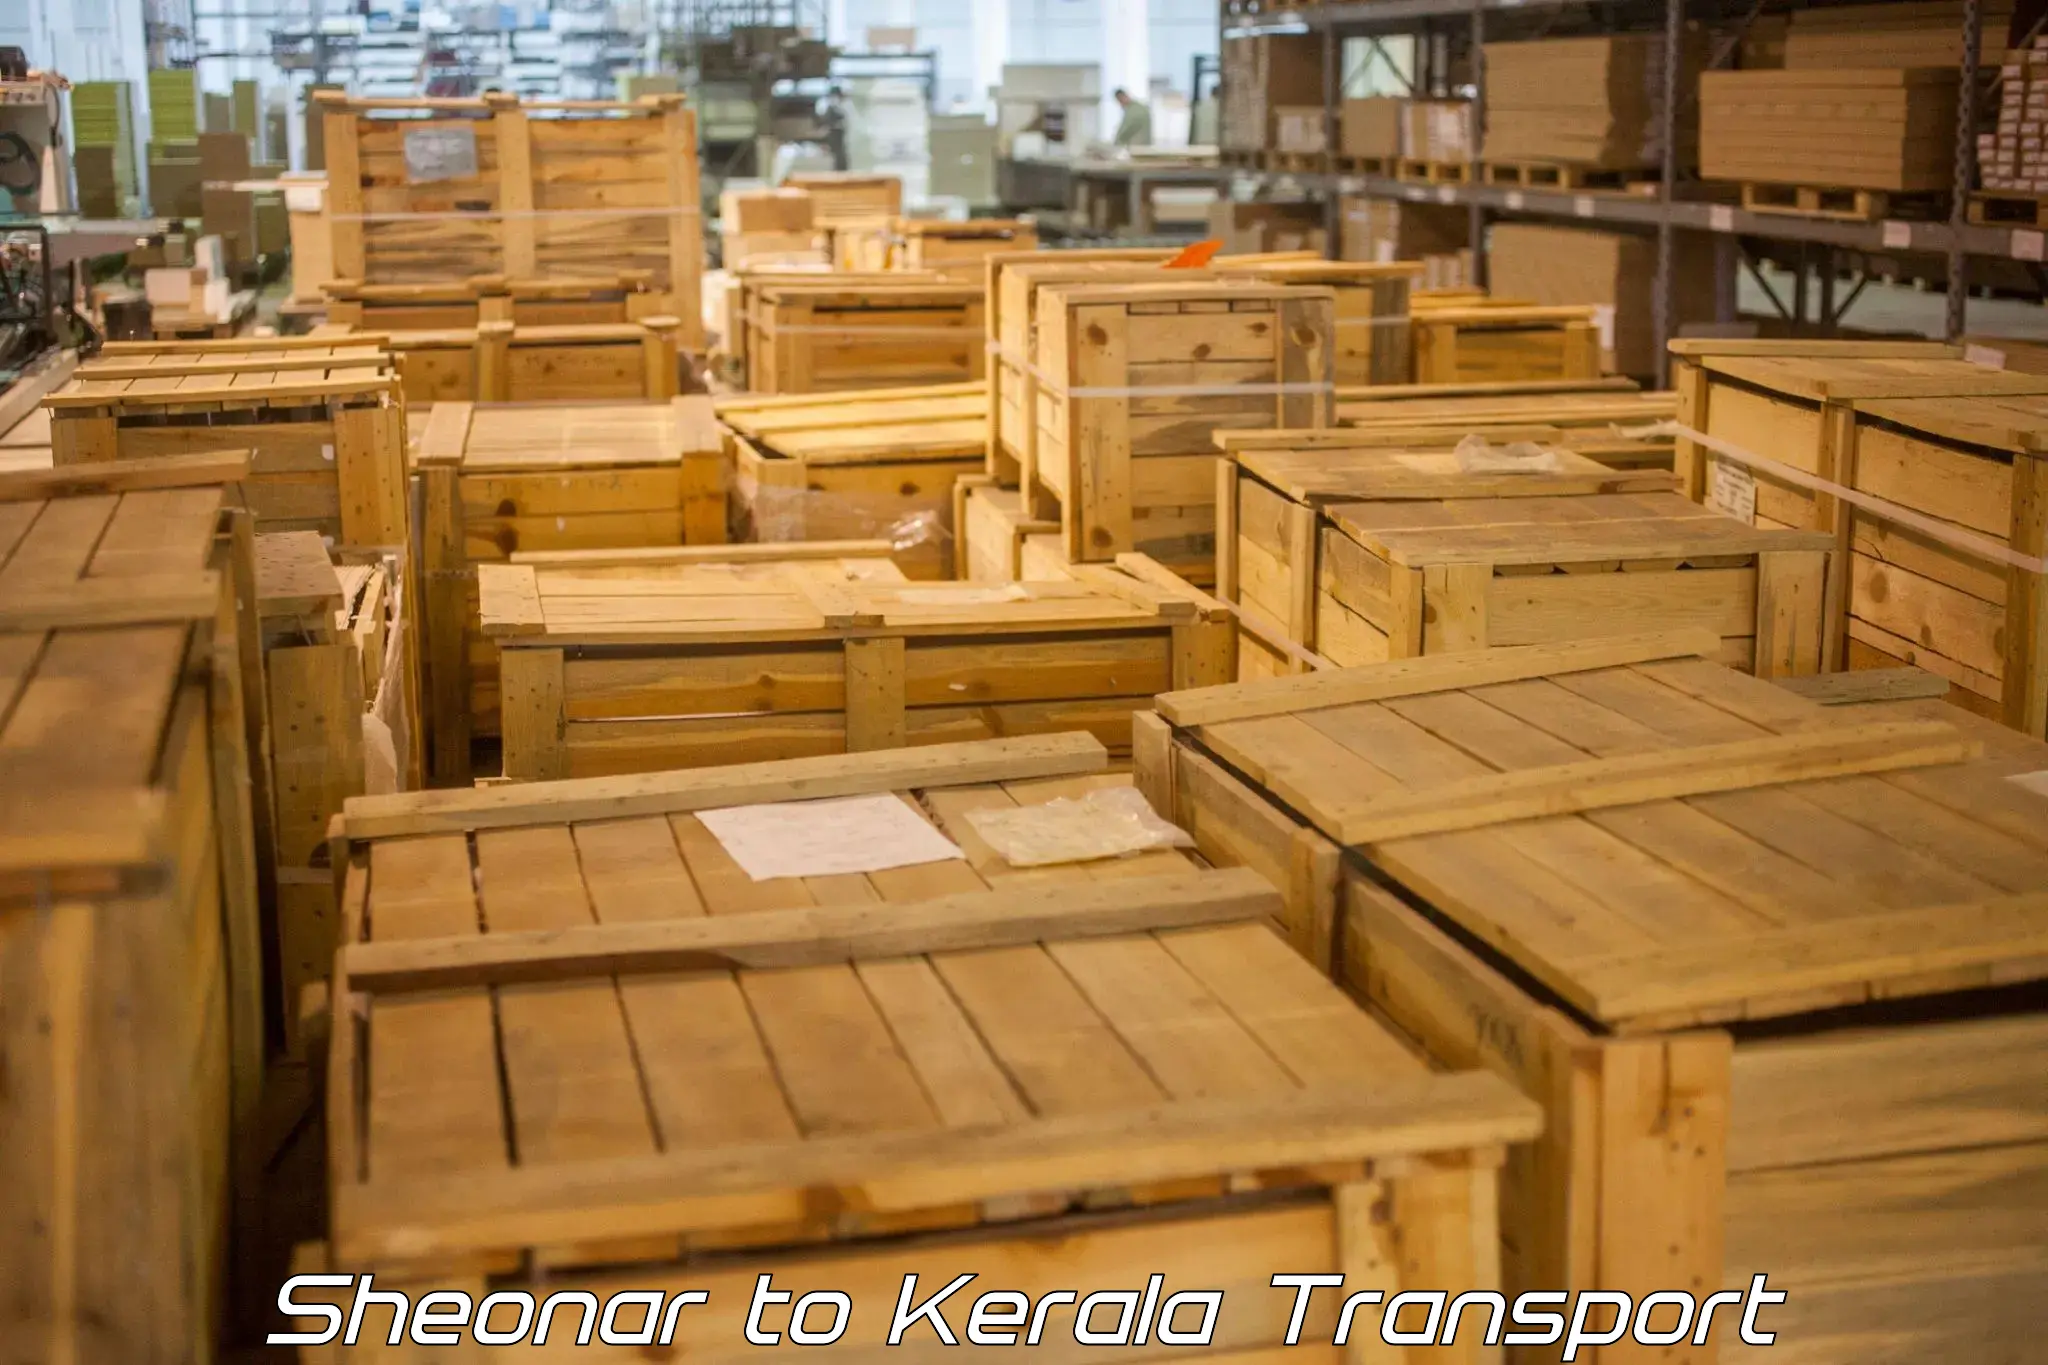 Container transportation services Sheonar to Kerala